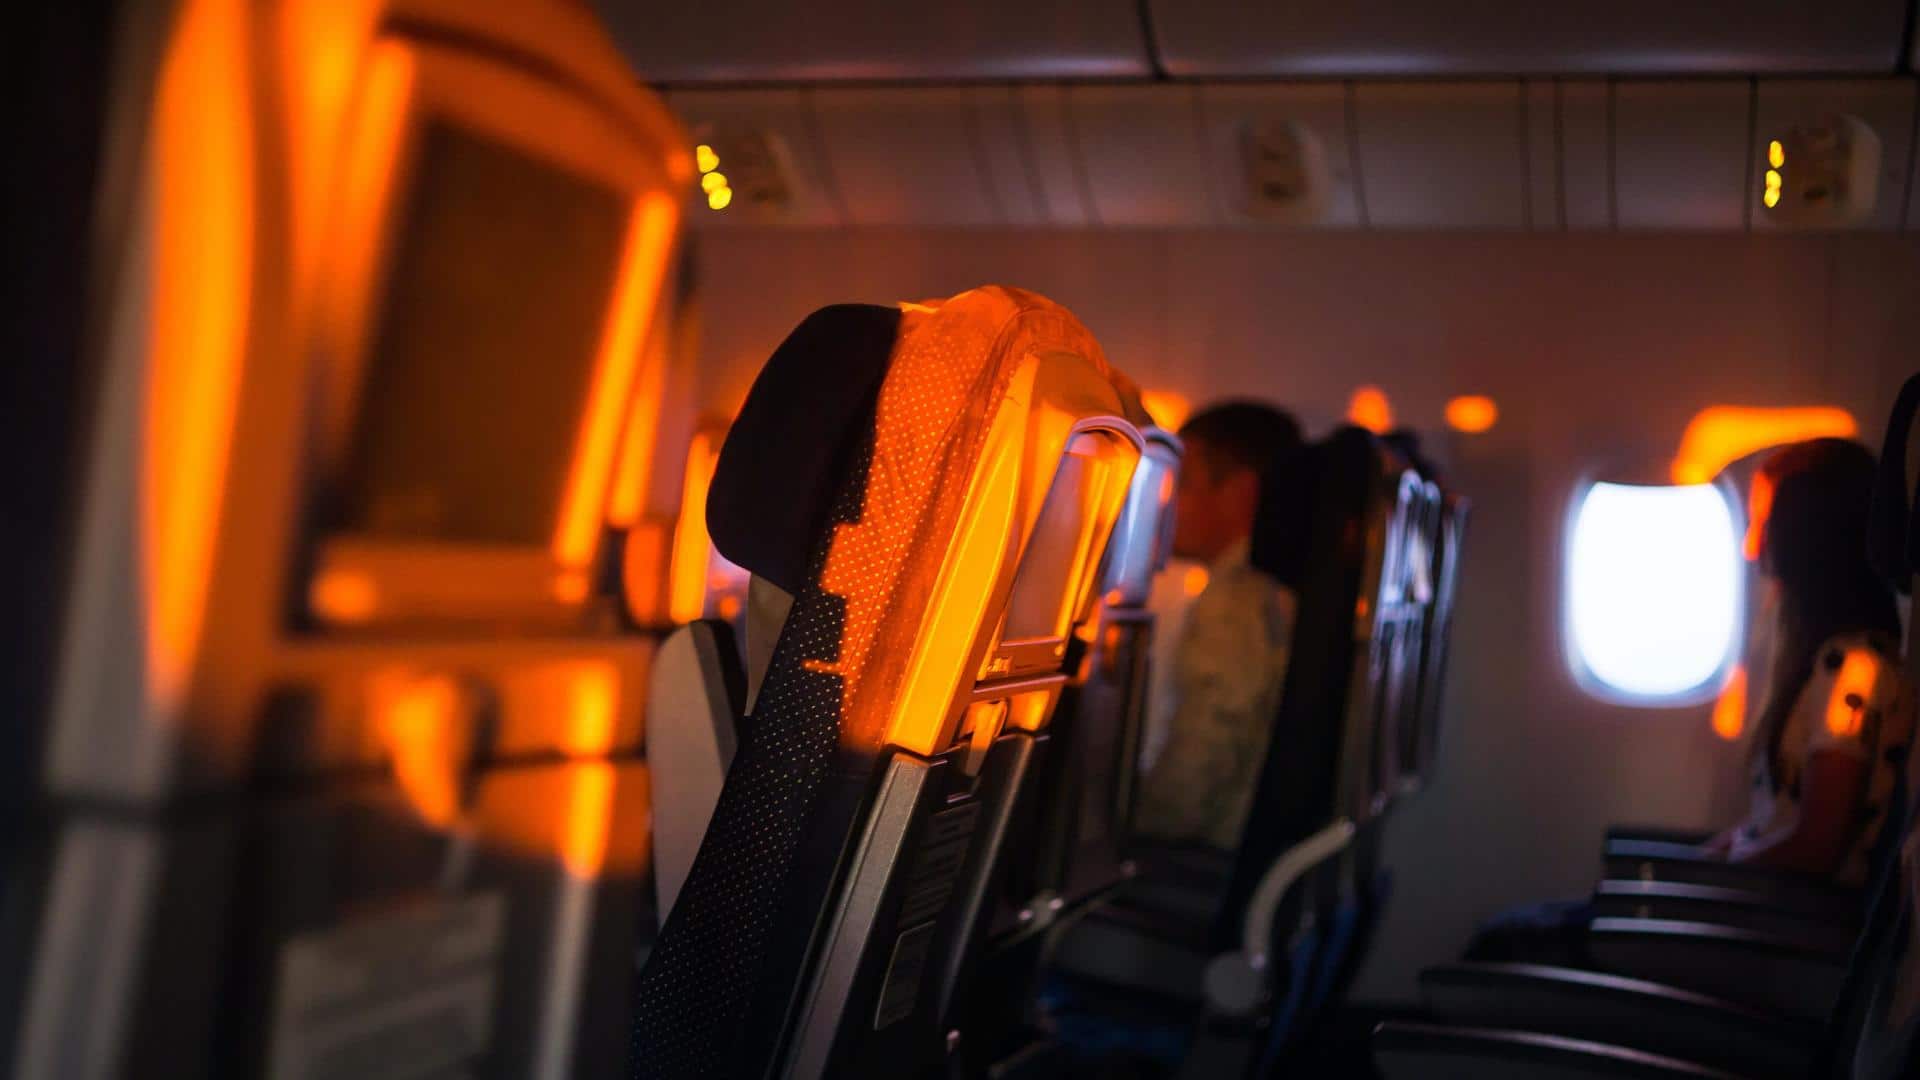 US: Passenger opens flight's emergency exit right before takeoff, arrested